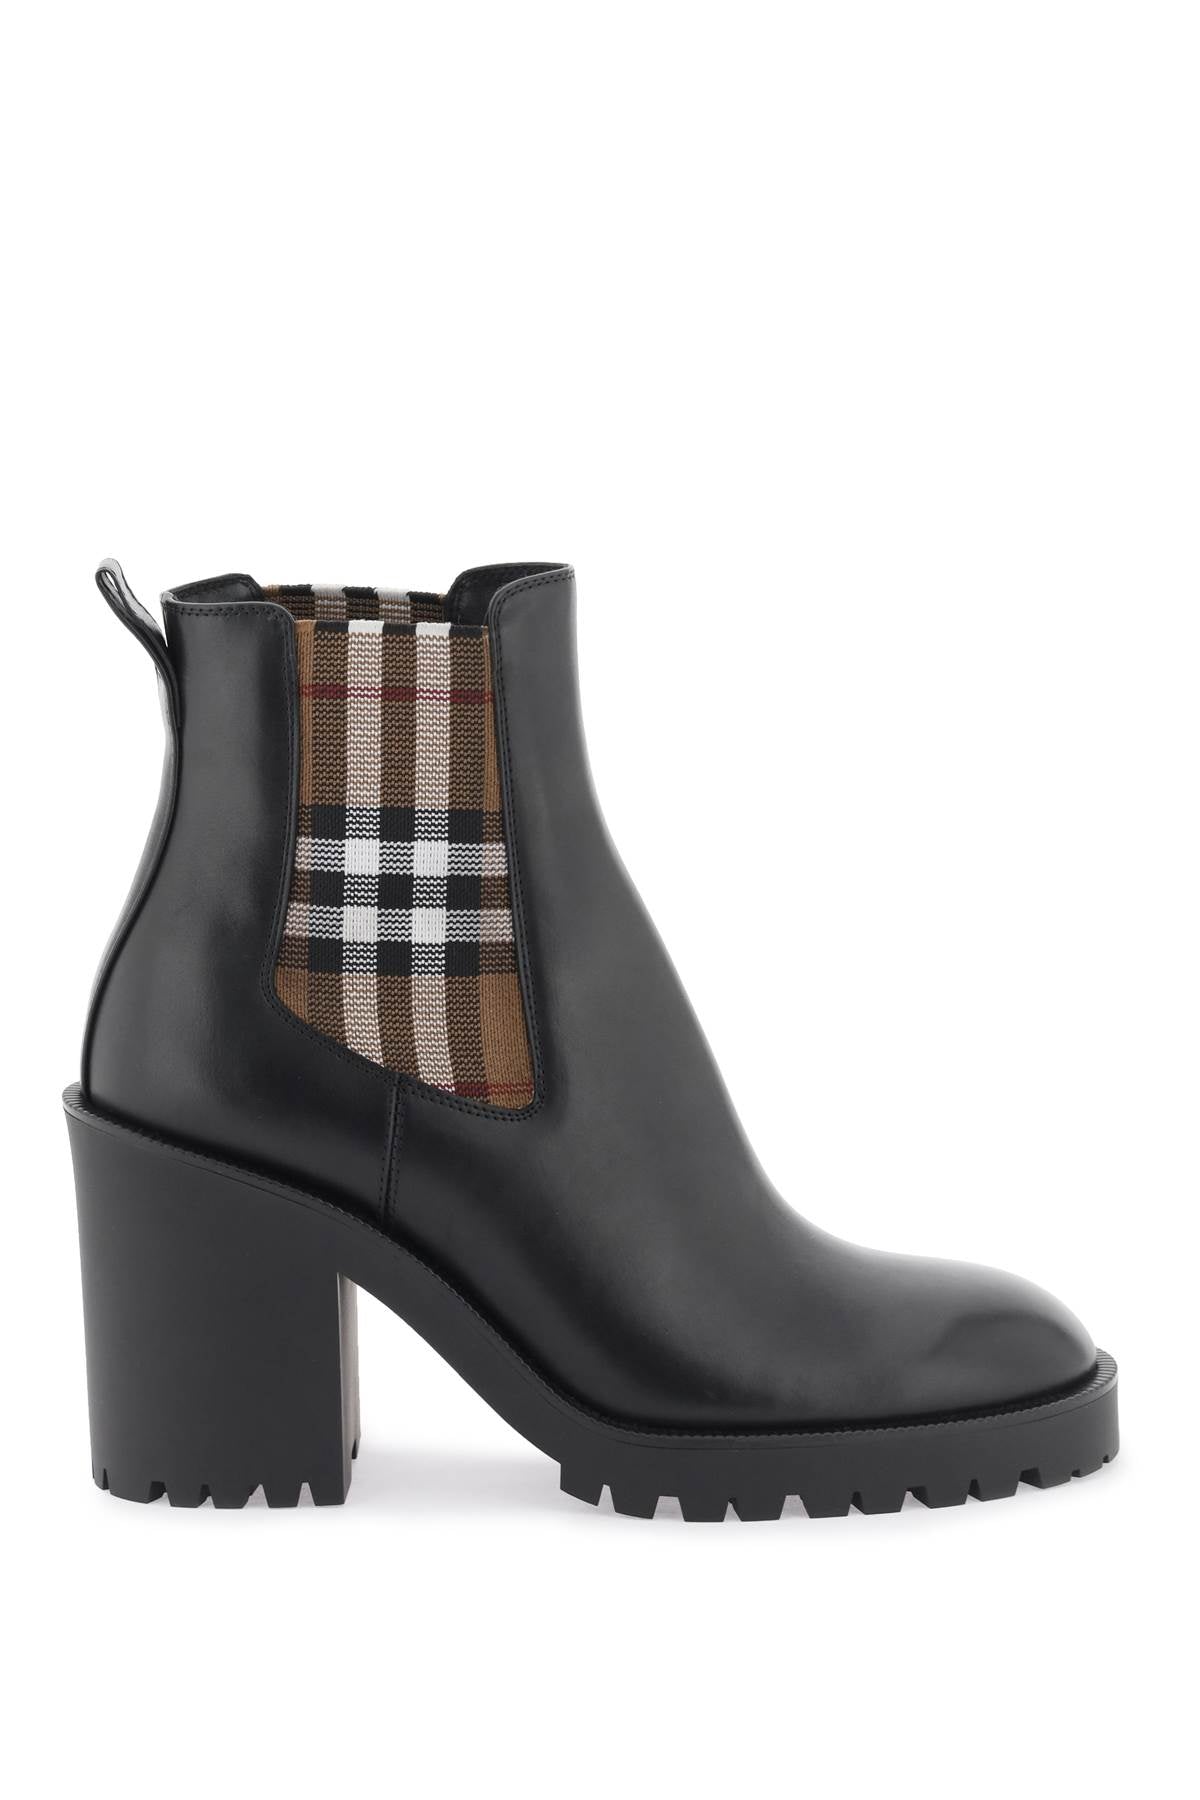 Burberry Leather Ankle Boots With Check Insert Black